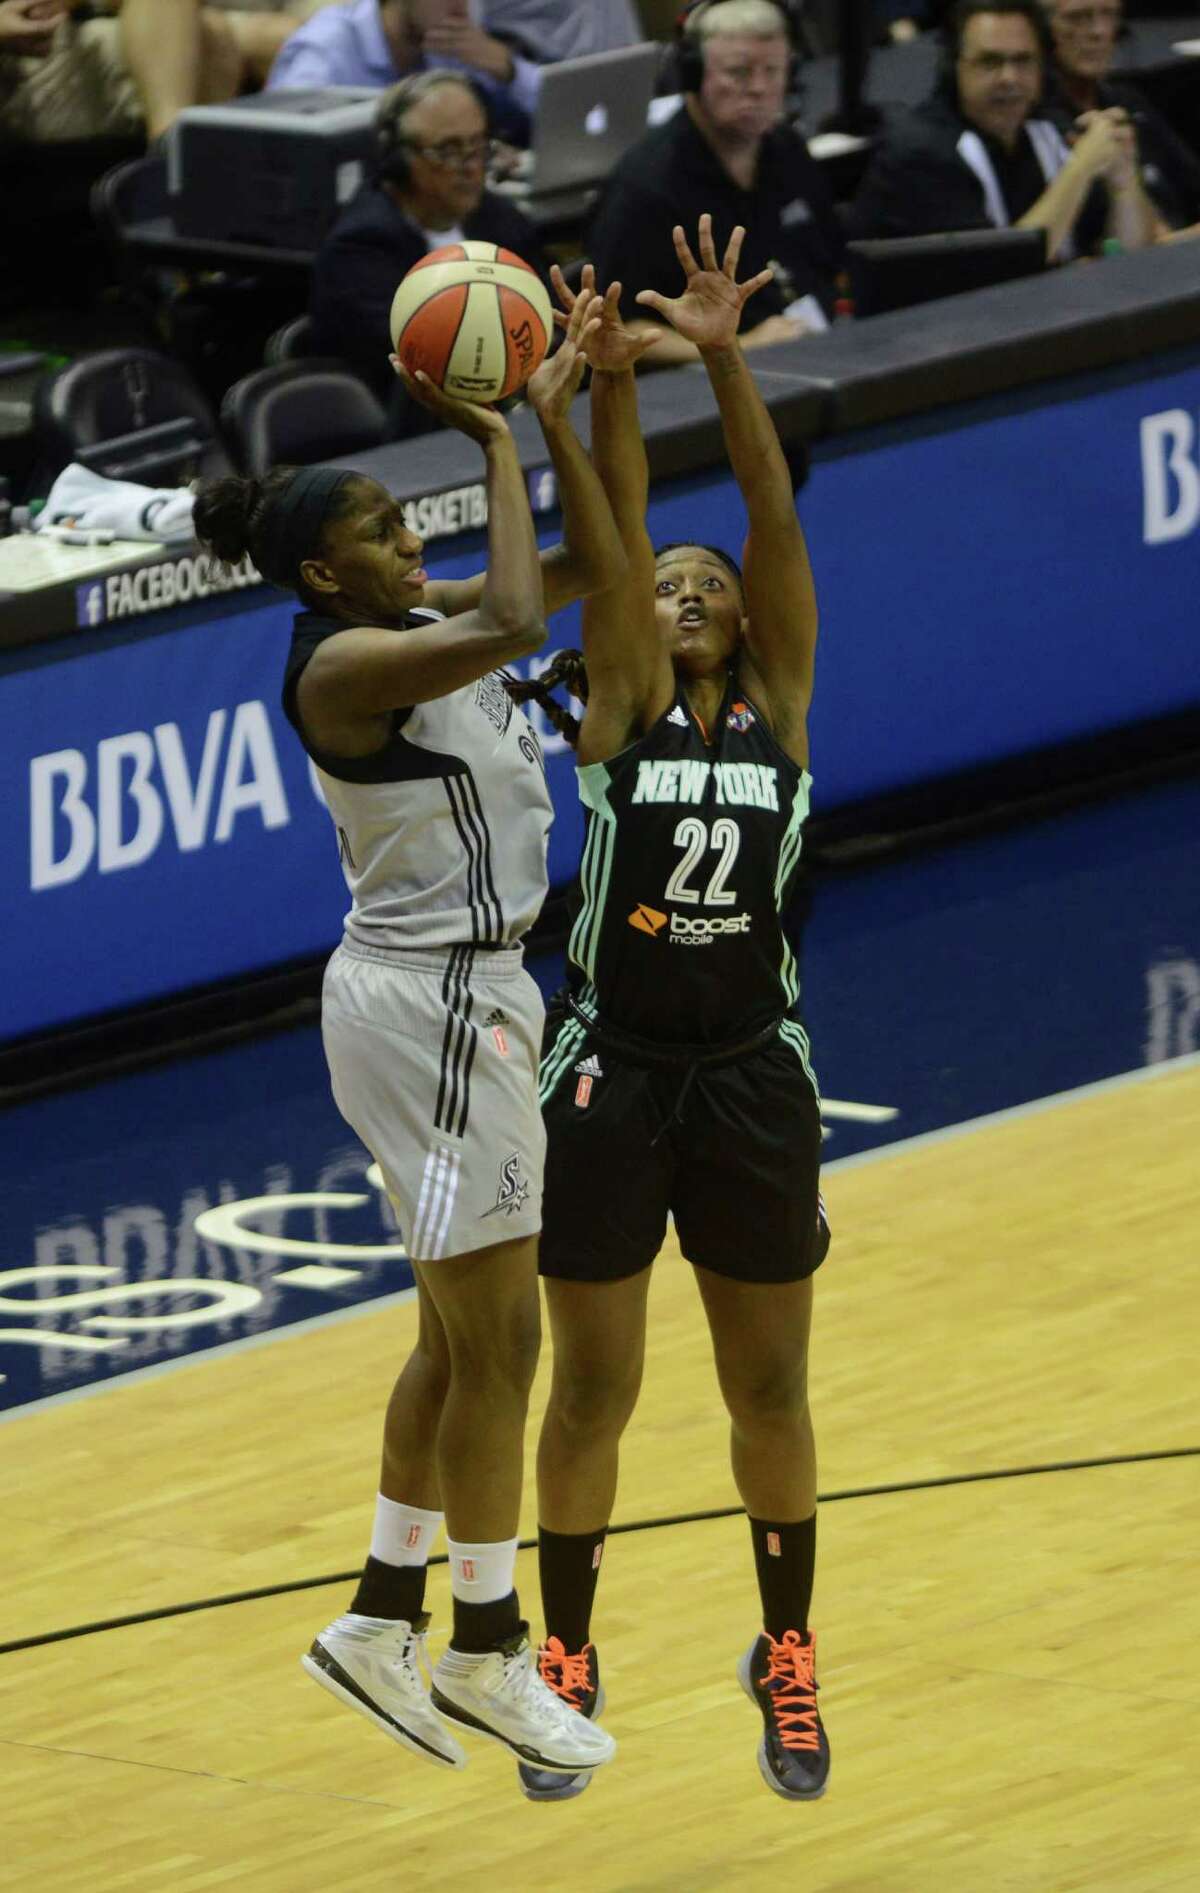 Shameka Christon of the San Antonio Stars, left, shoots as Charde Houston of the New York Liberty defends during WNBA action in the AT&T Center on Wednesday, July 9, 2014.